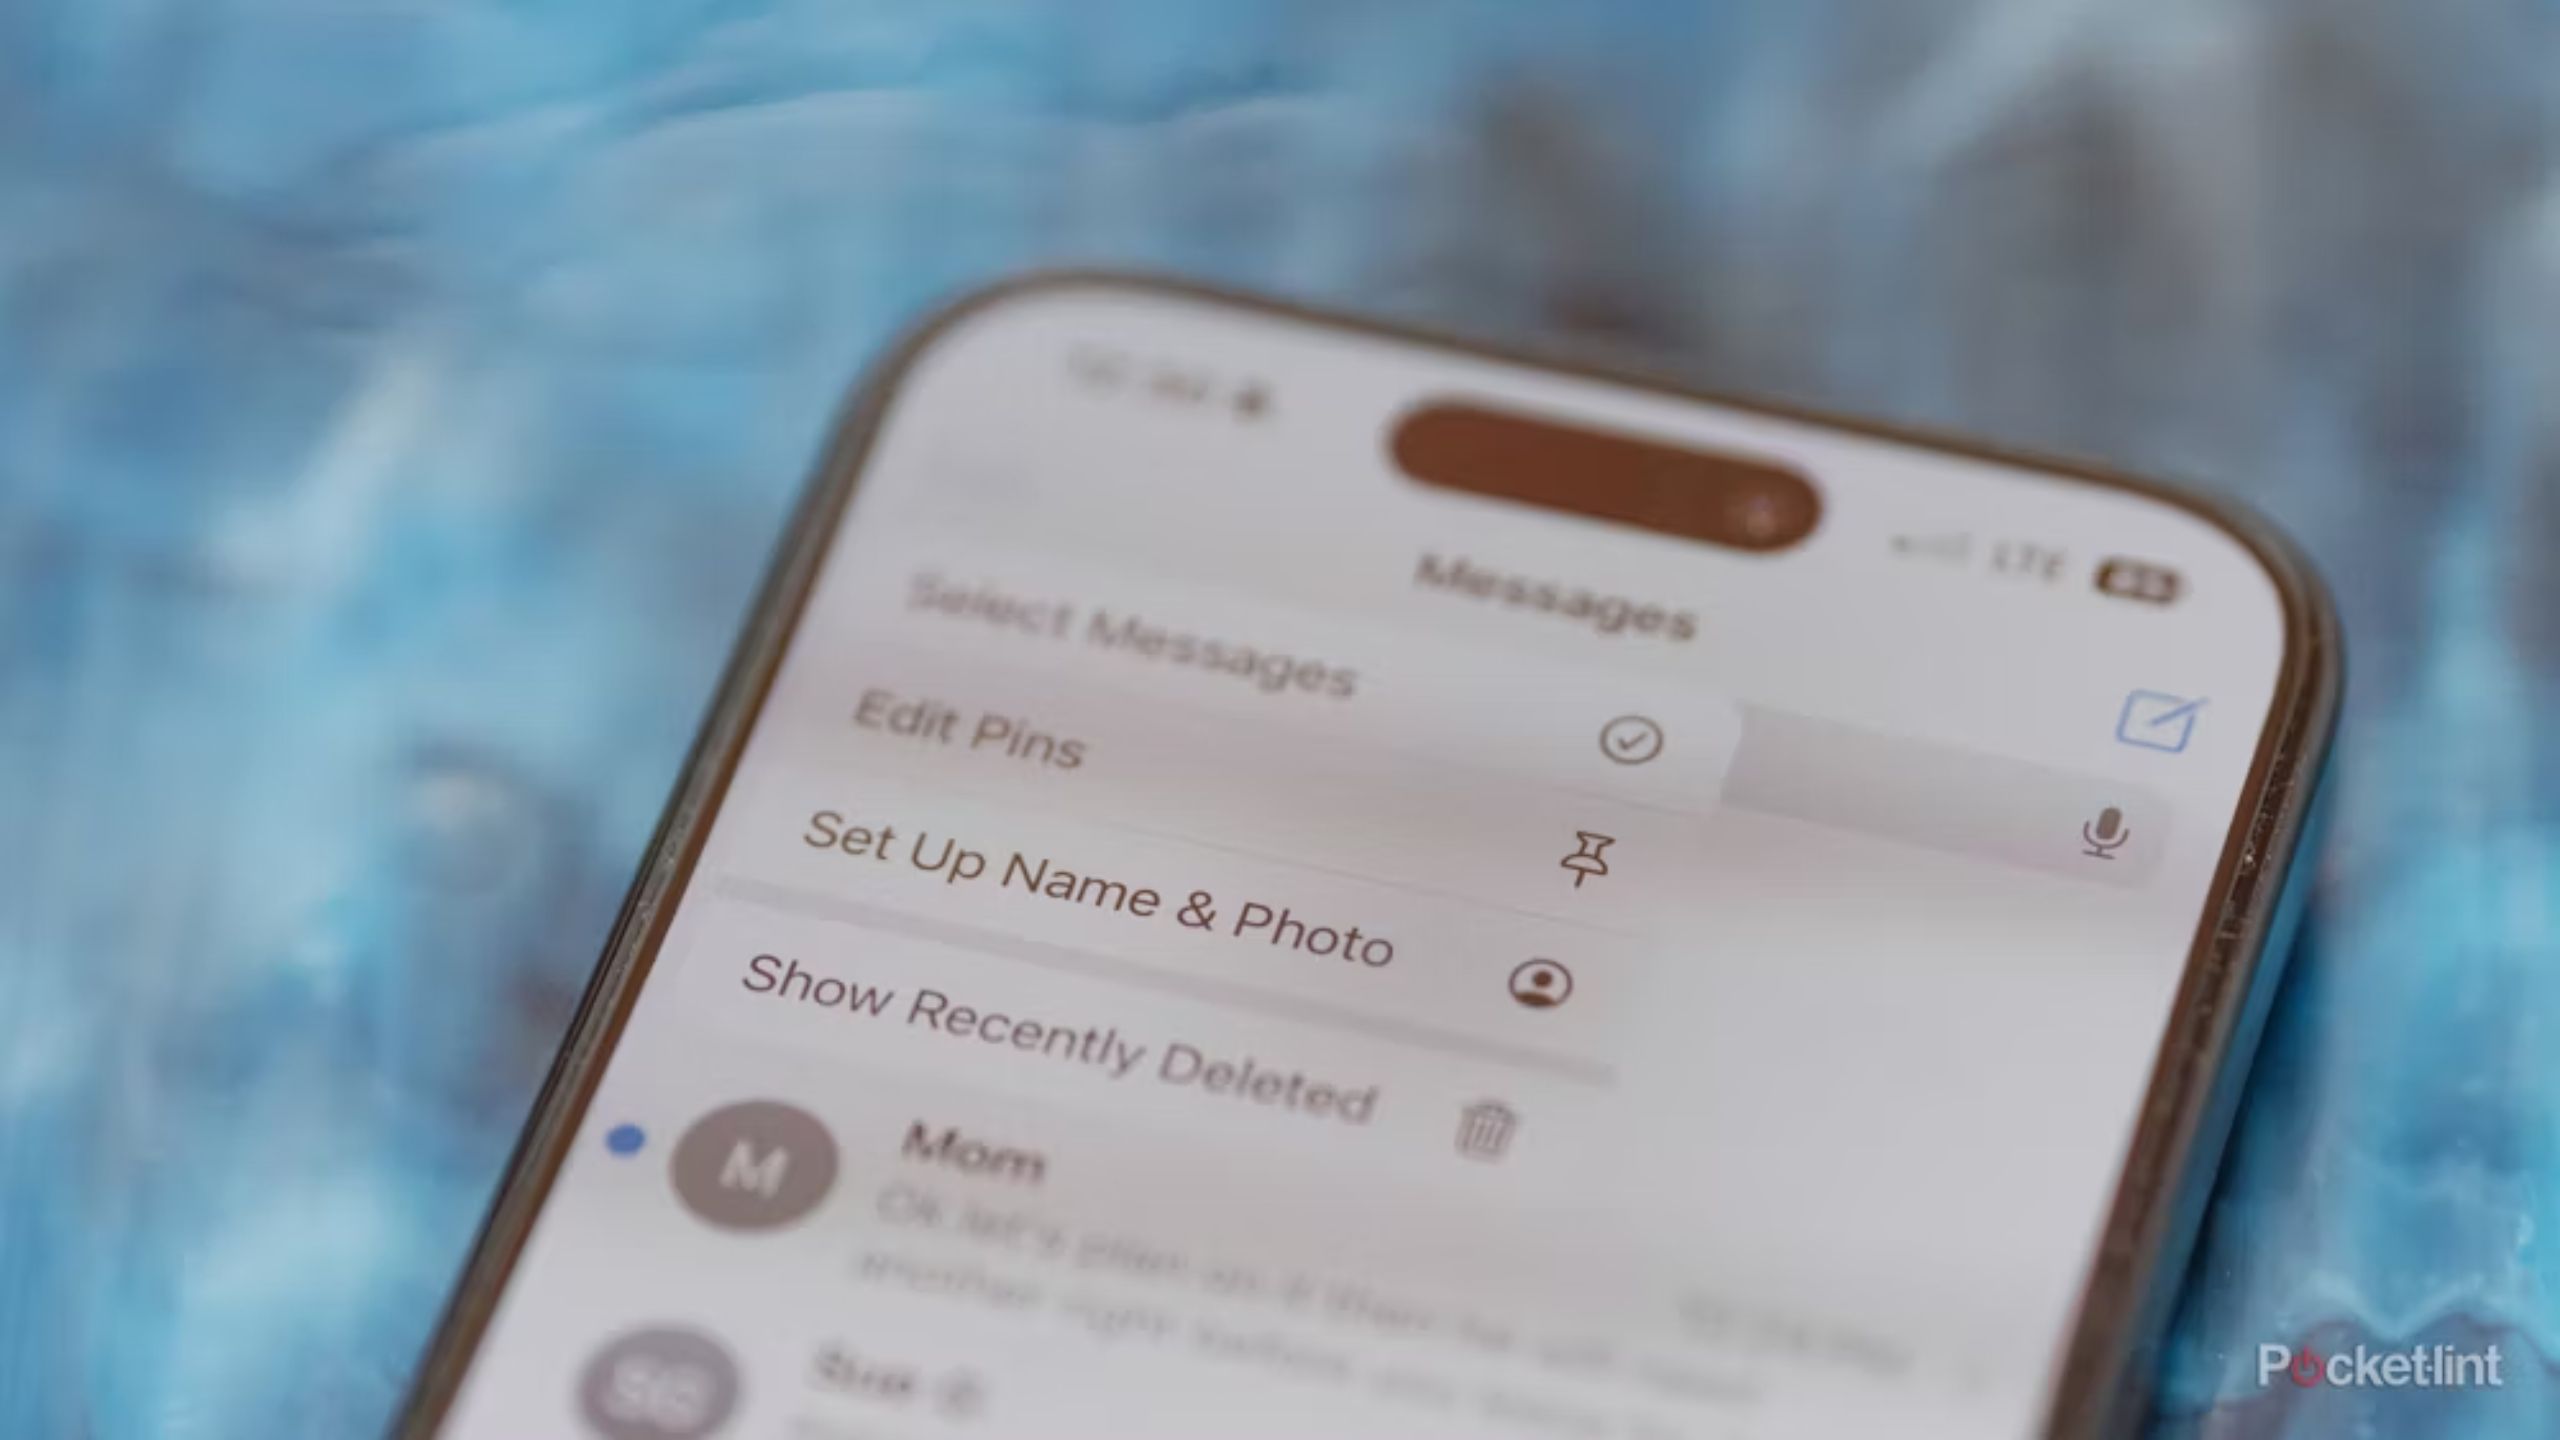 The Pin a message thread menu pop-up on iMessage